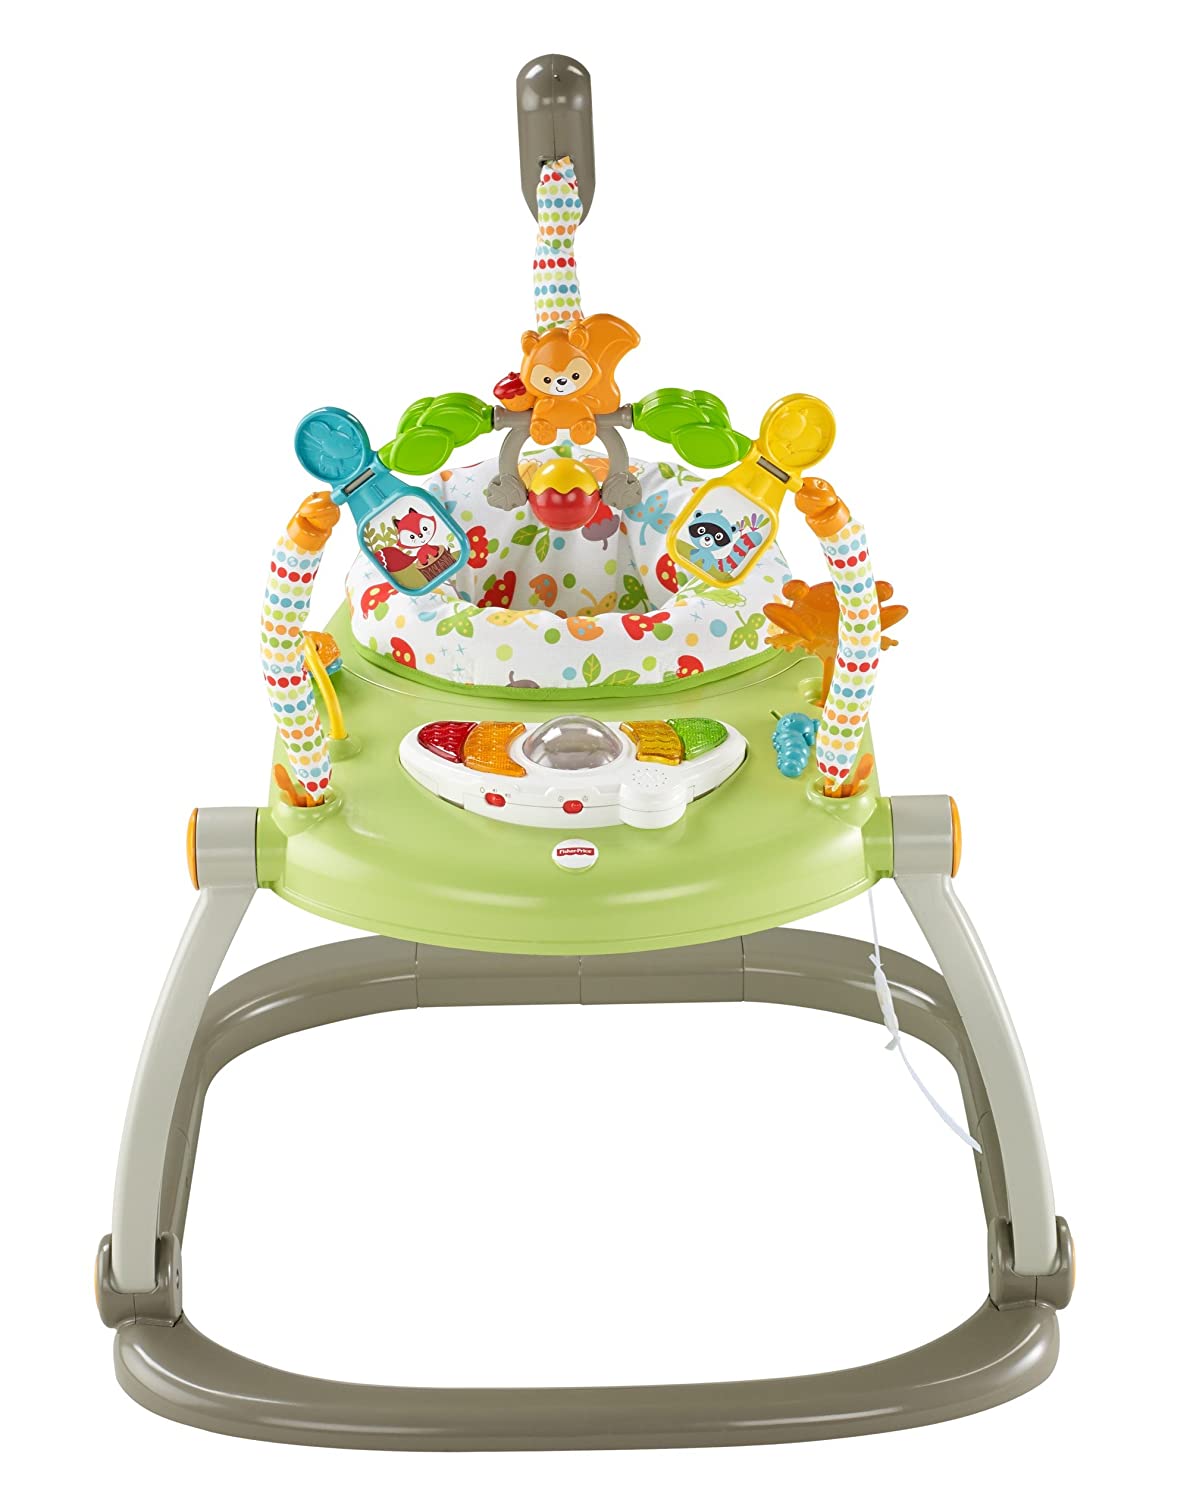 7 Best Fisher Price Jumperoo Reviews in 2022 5